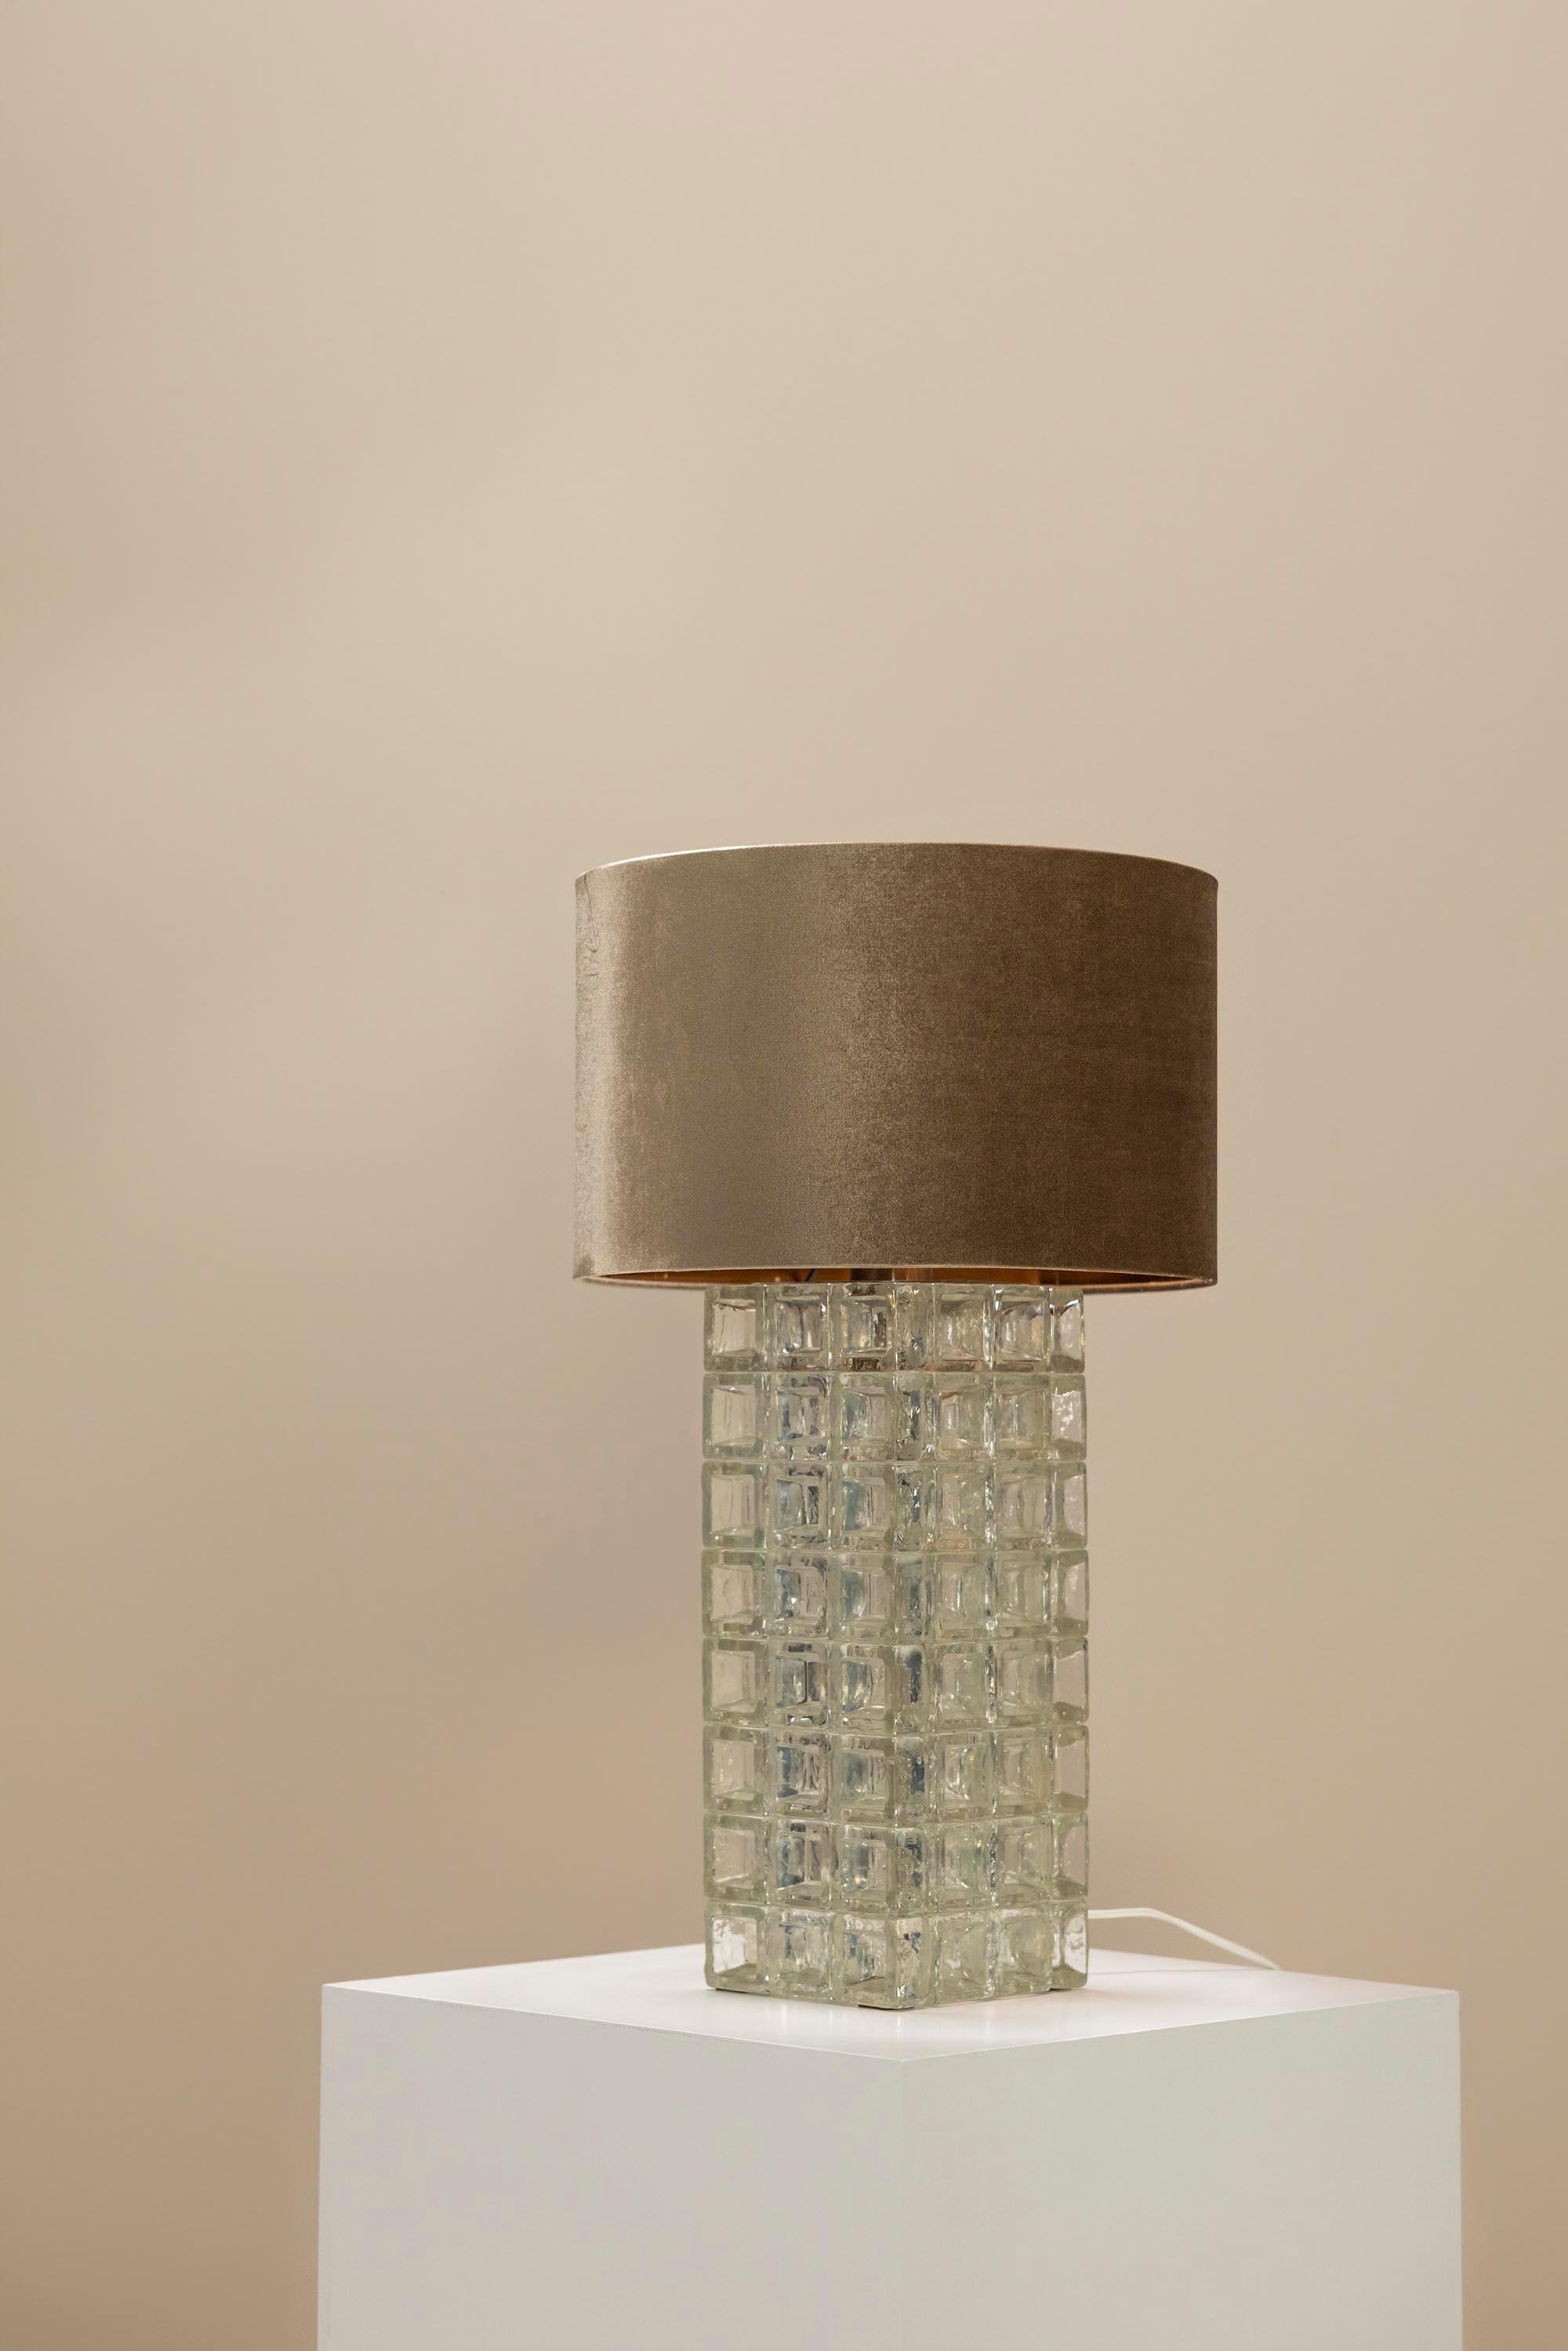 Mid-Century Modern Table Lamp In Murano Glass By Albano Poli For Poliarte, Italy 1970's For Sale